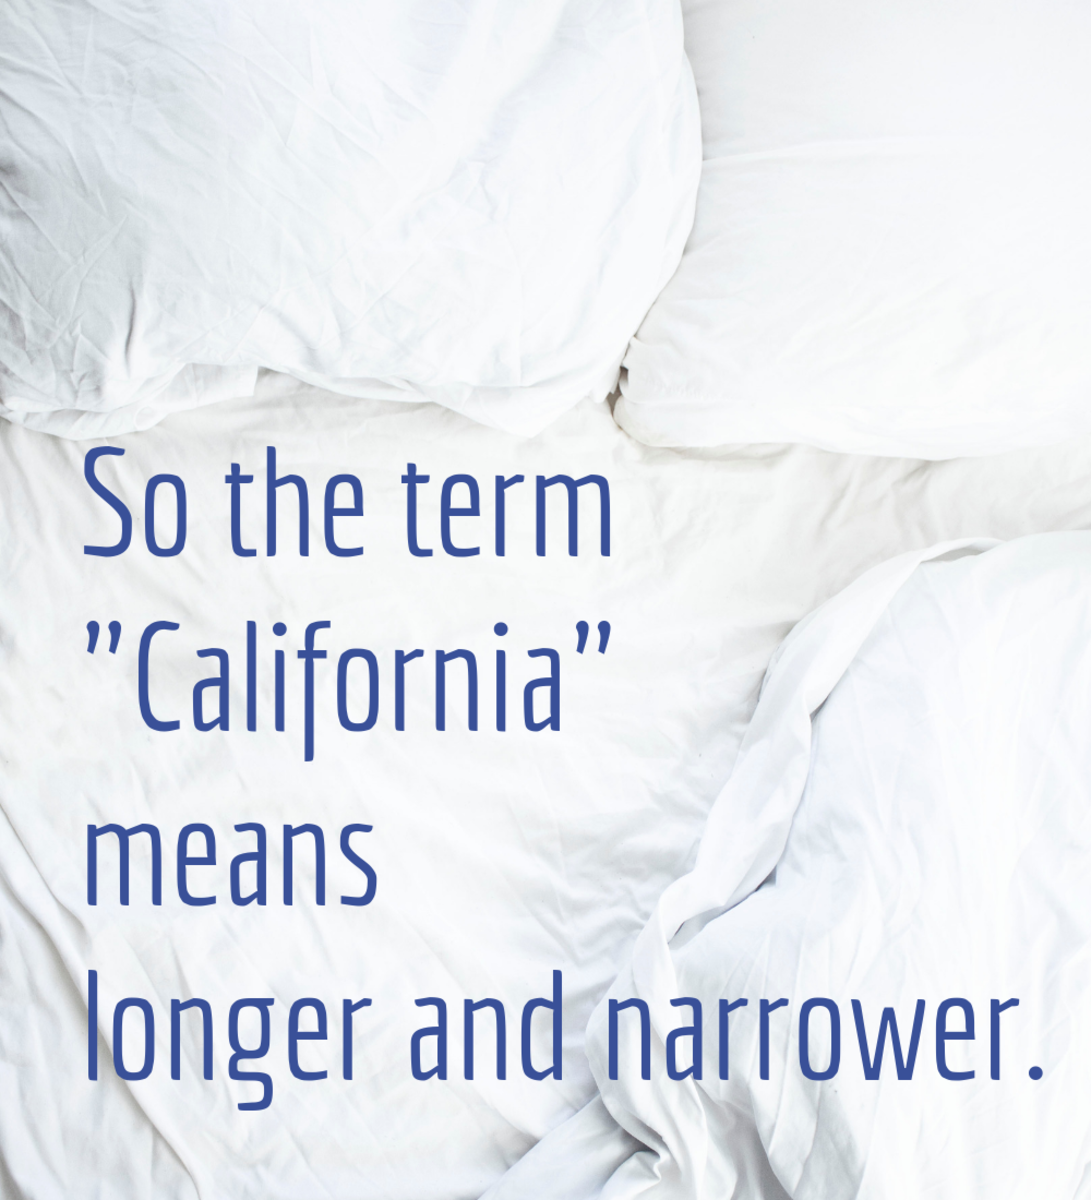 What does "California" mean when referring to mattresses?